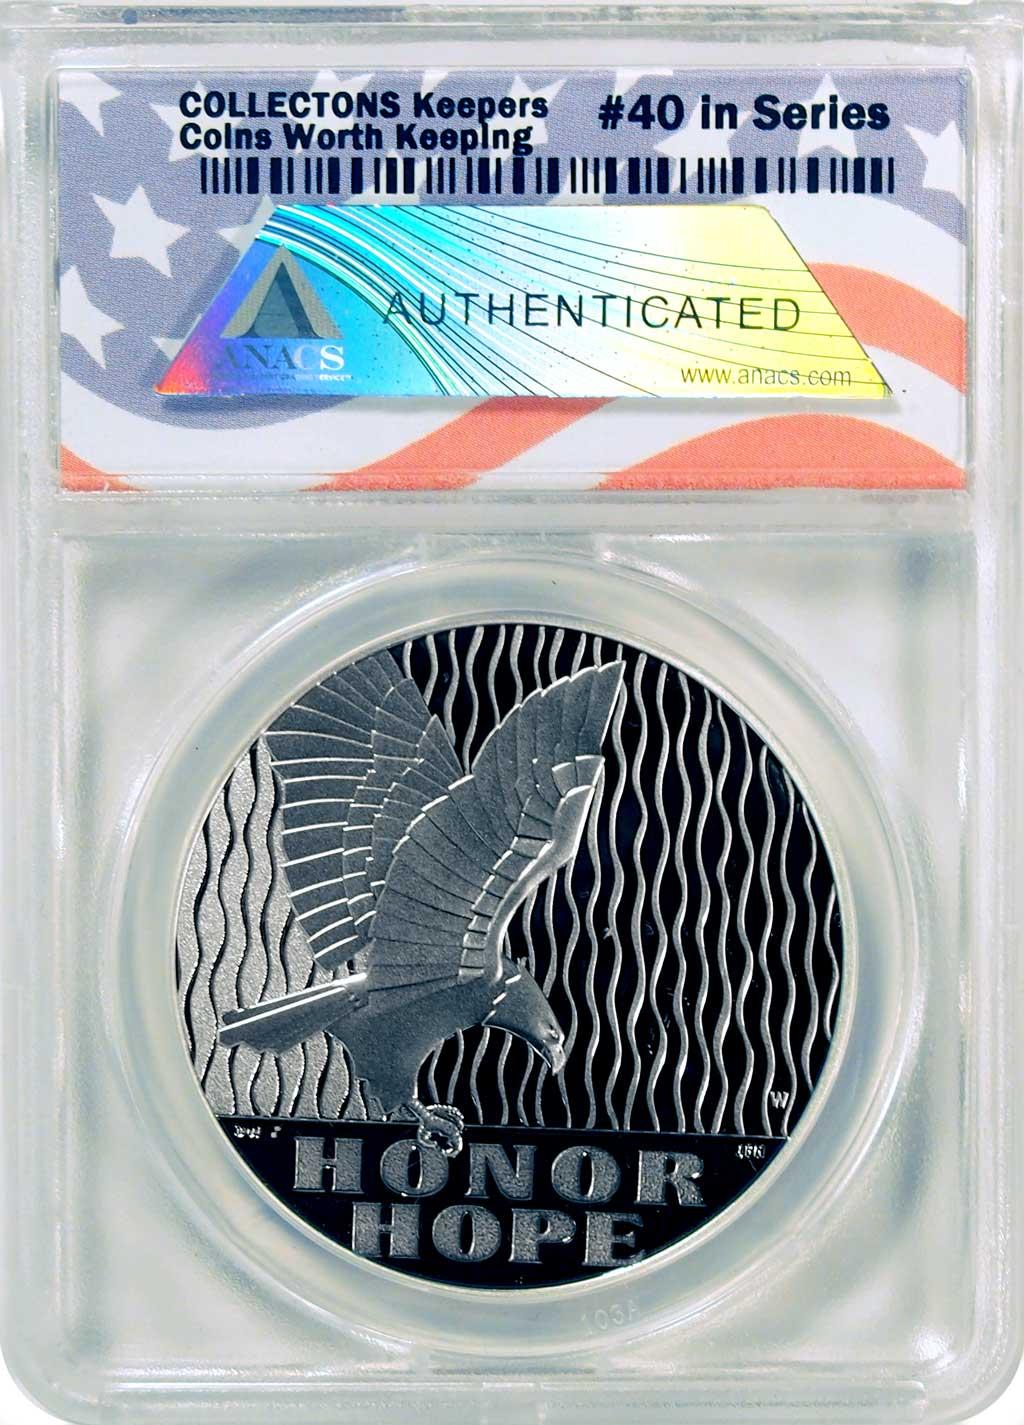 CollecTons Keepers #40: 2011-W September 11 National Medal - 1 ounce Silver Proof Certified in Exclusive ANACS GEM Proof Holder